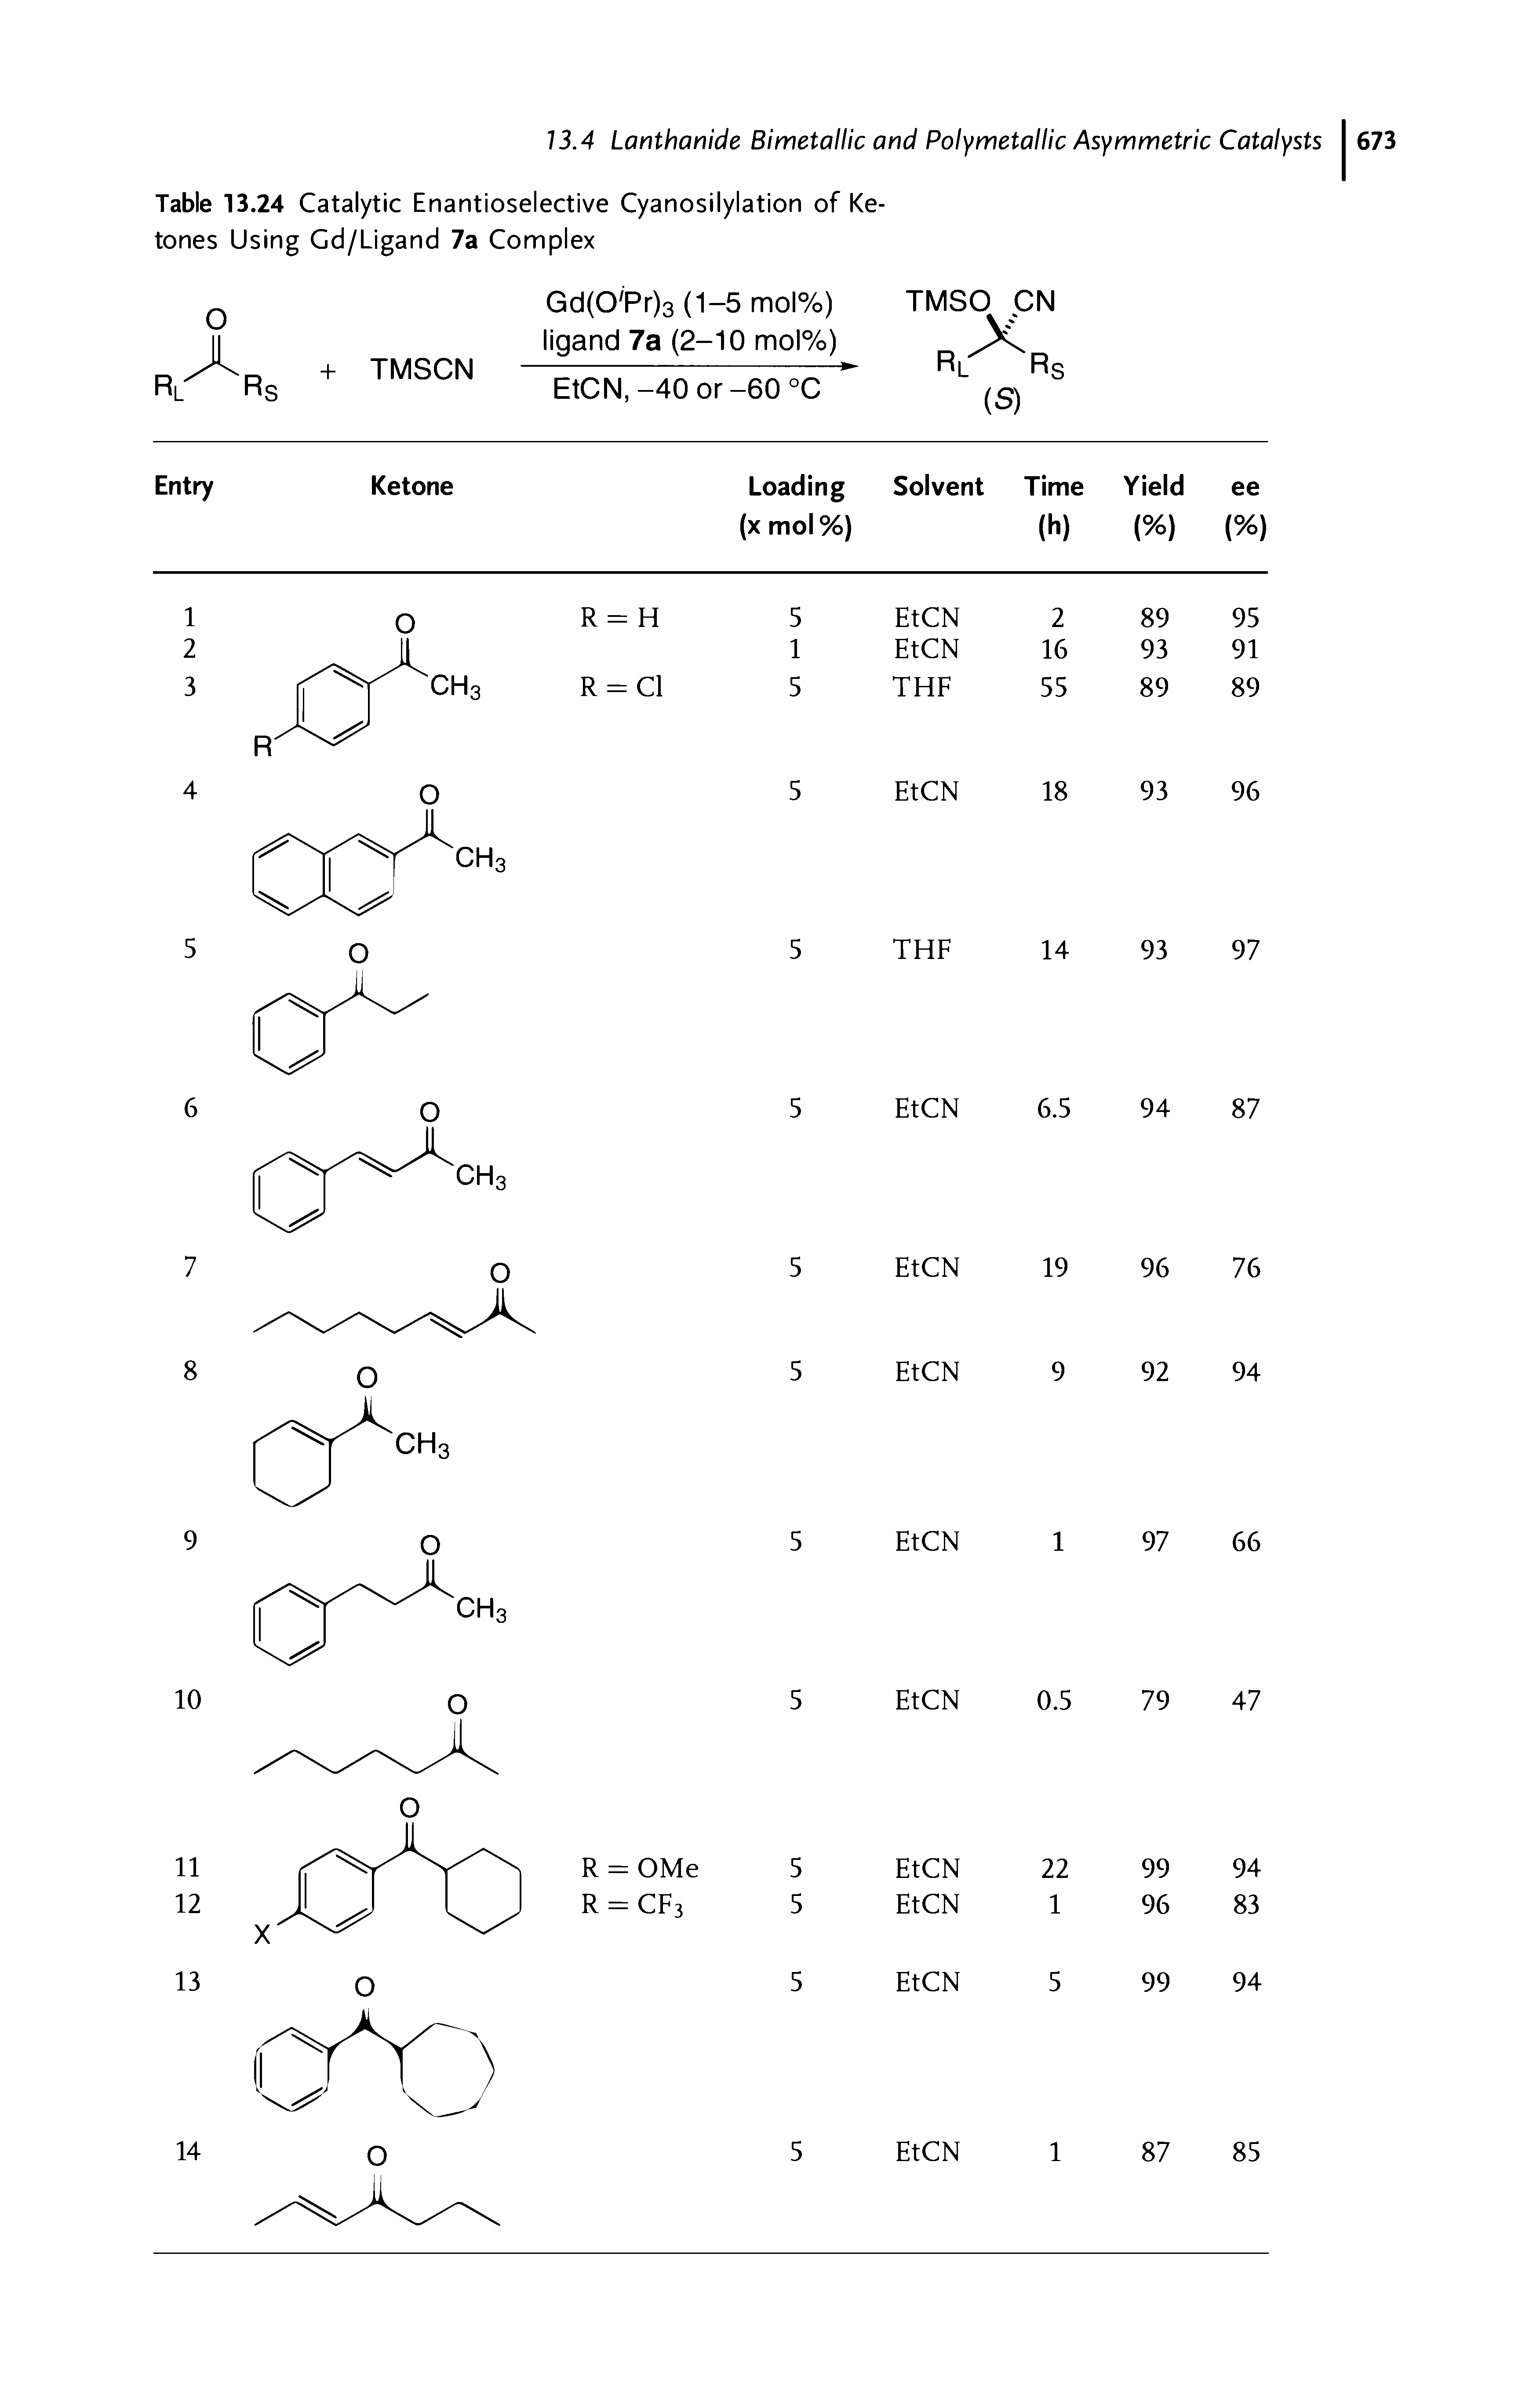 Table 13.24 Catalytic Enantioselective Cyanosilylation of Ketones Using Gd/Ligand 7a Complex...